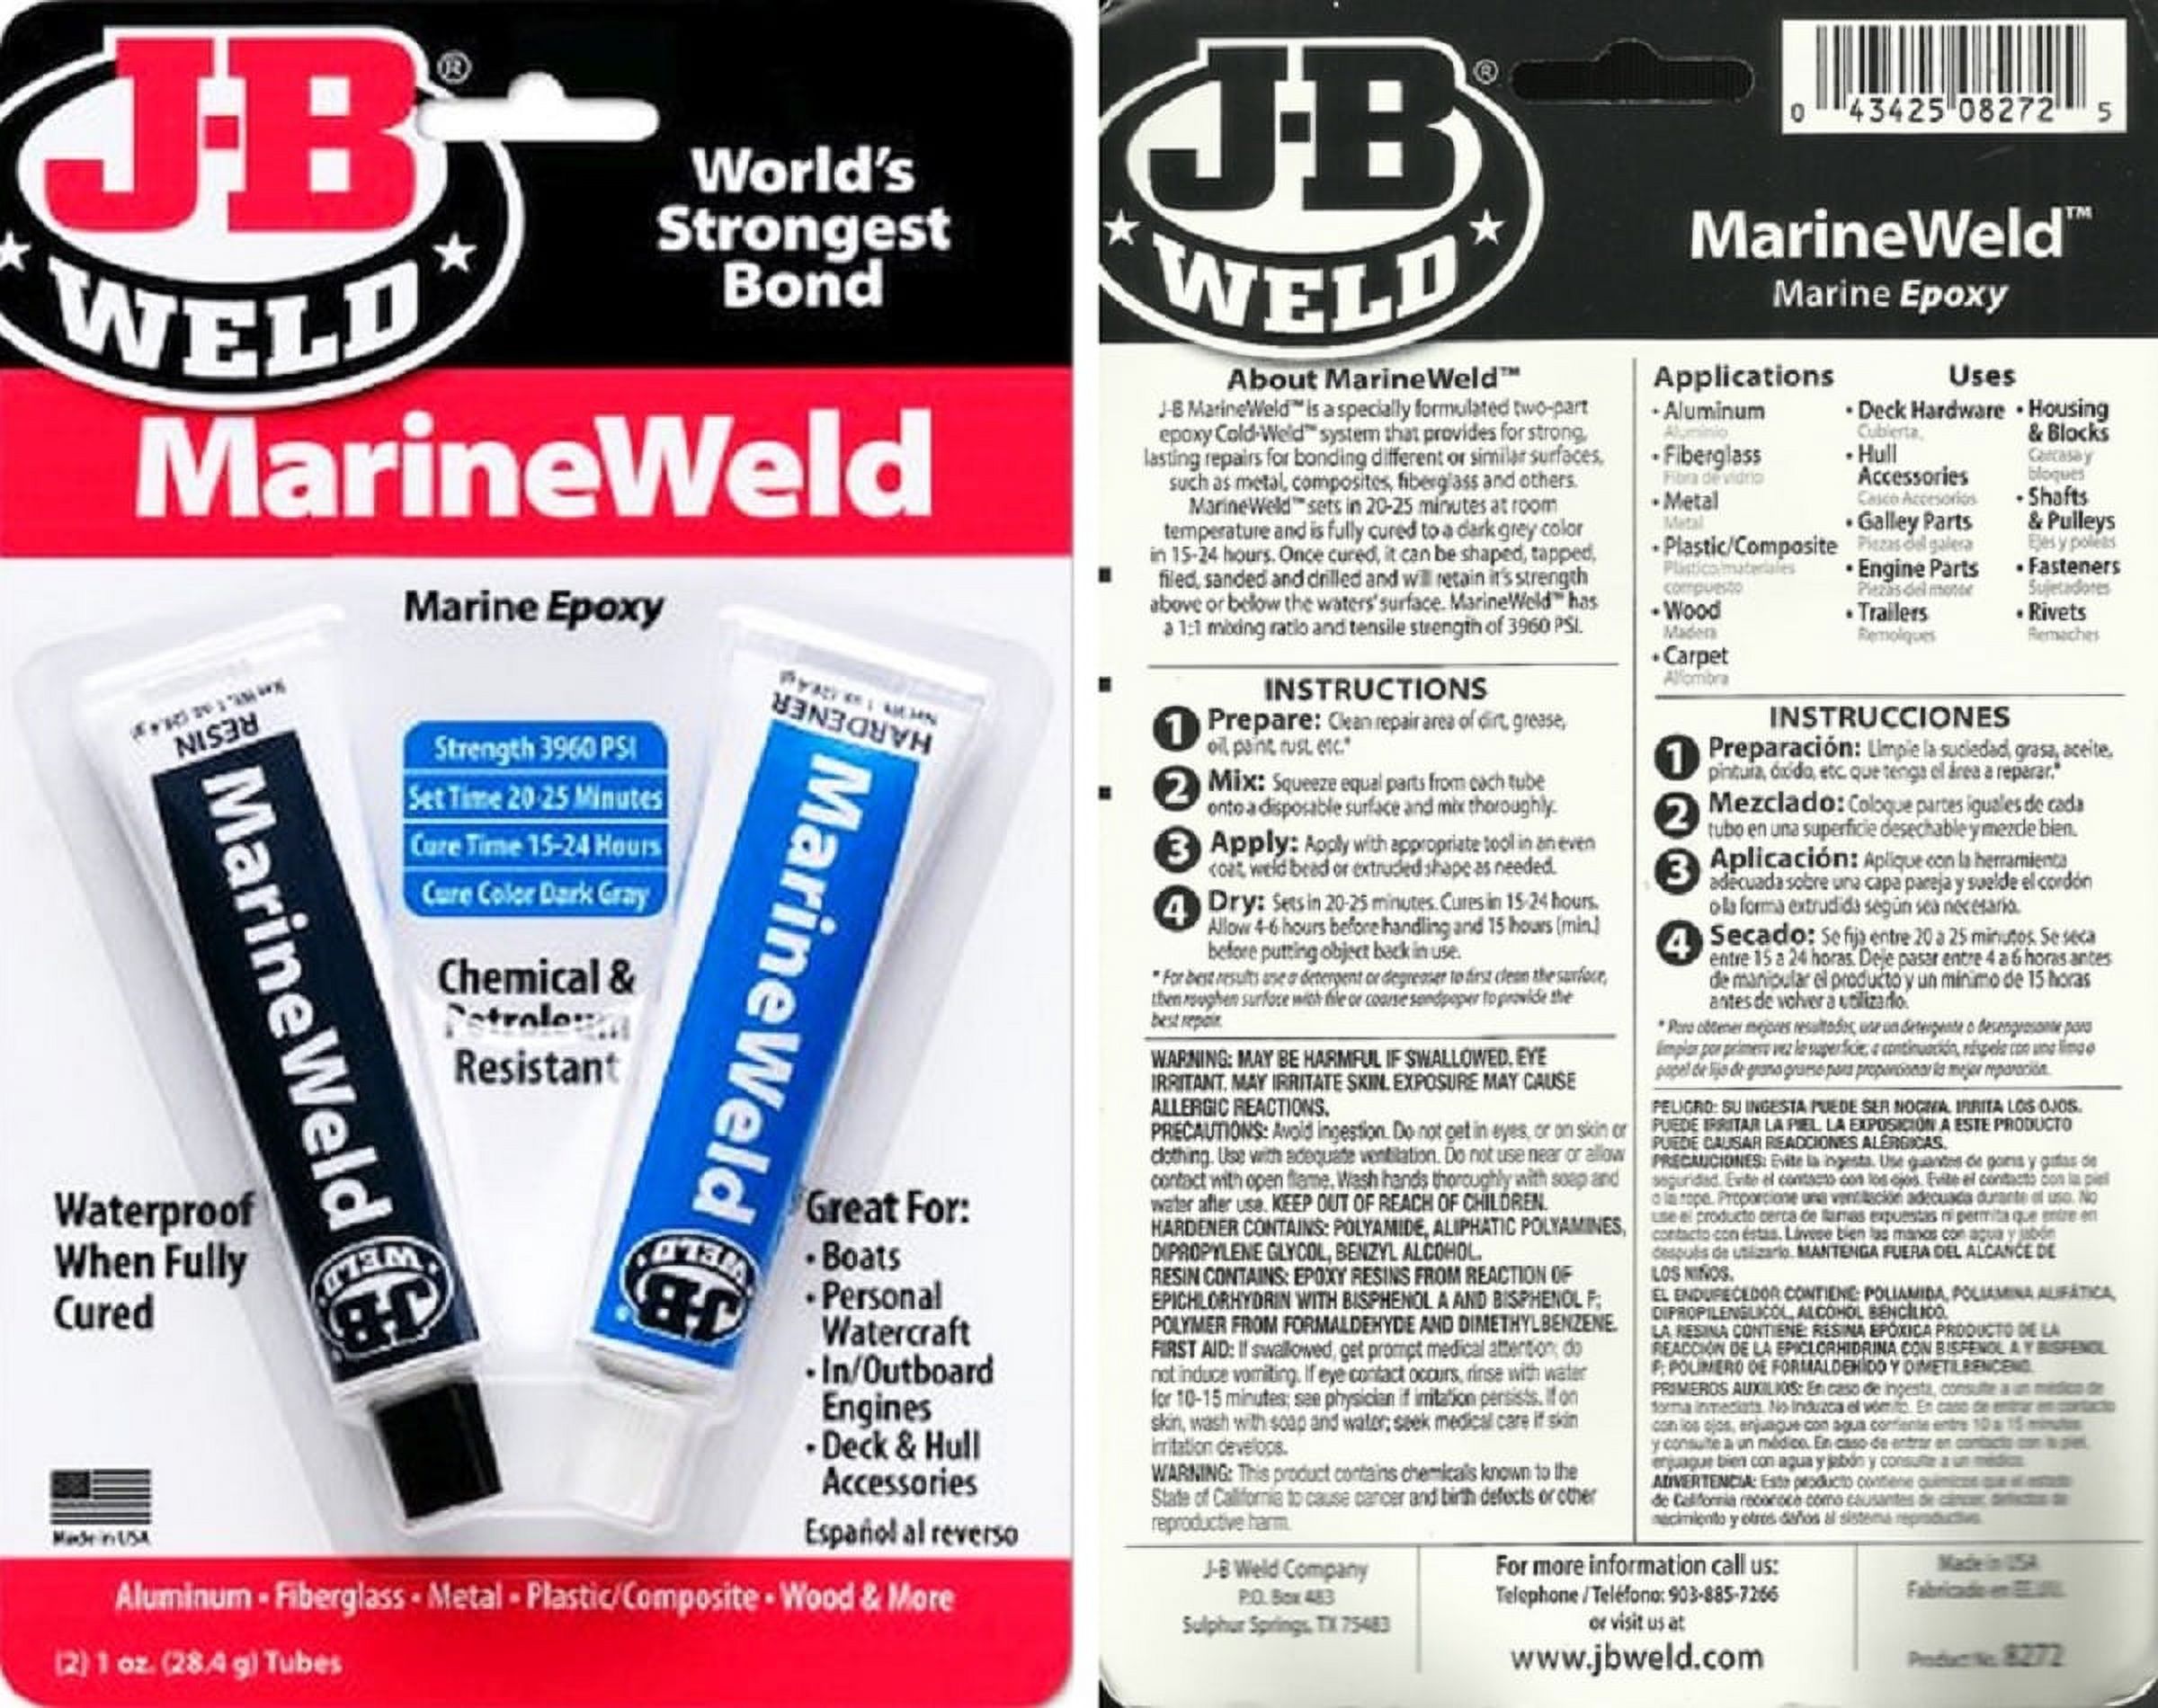 J-B Weld 1oz Gray Marine Weld Epoxy Adhesive Kit is a specially formulated two-part epoxy cold weld system that provides for strong, lasting repairs for bonding different or similar surfaces - image 4 of 7